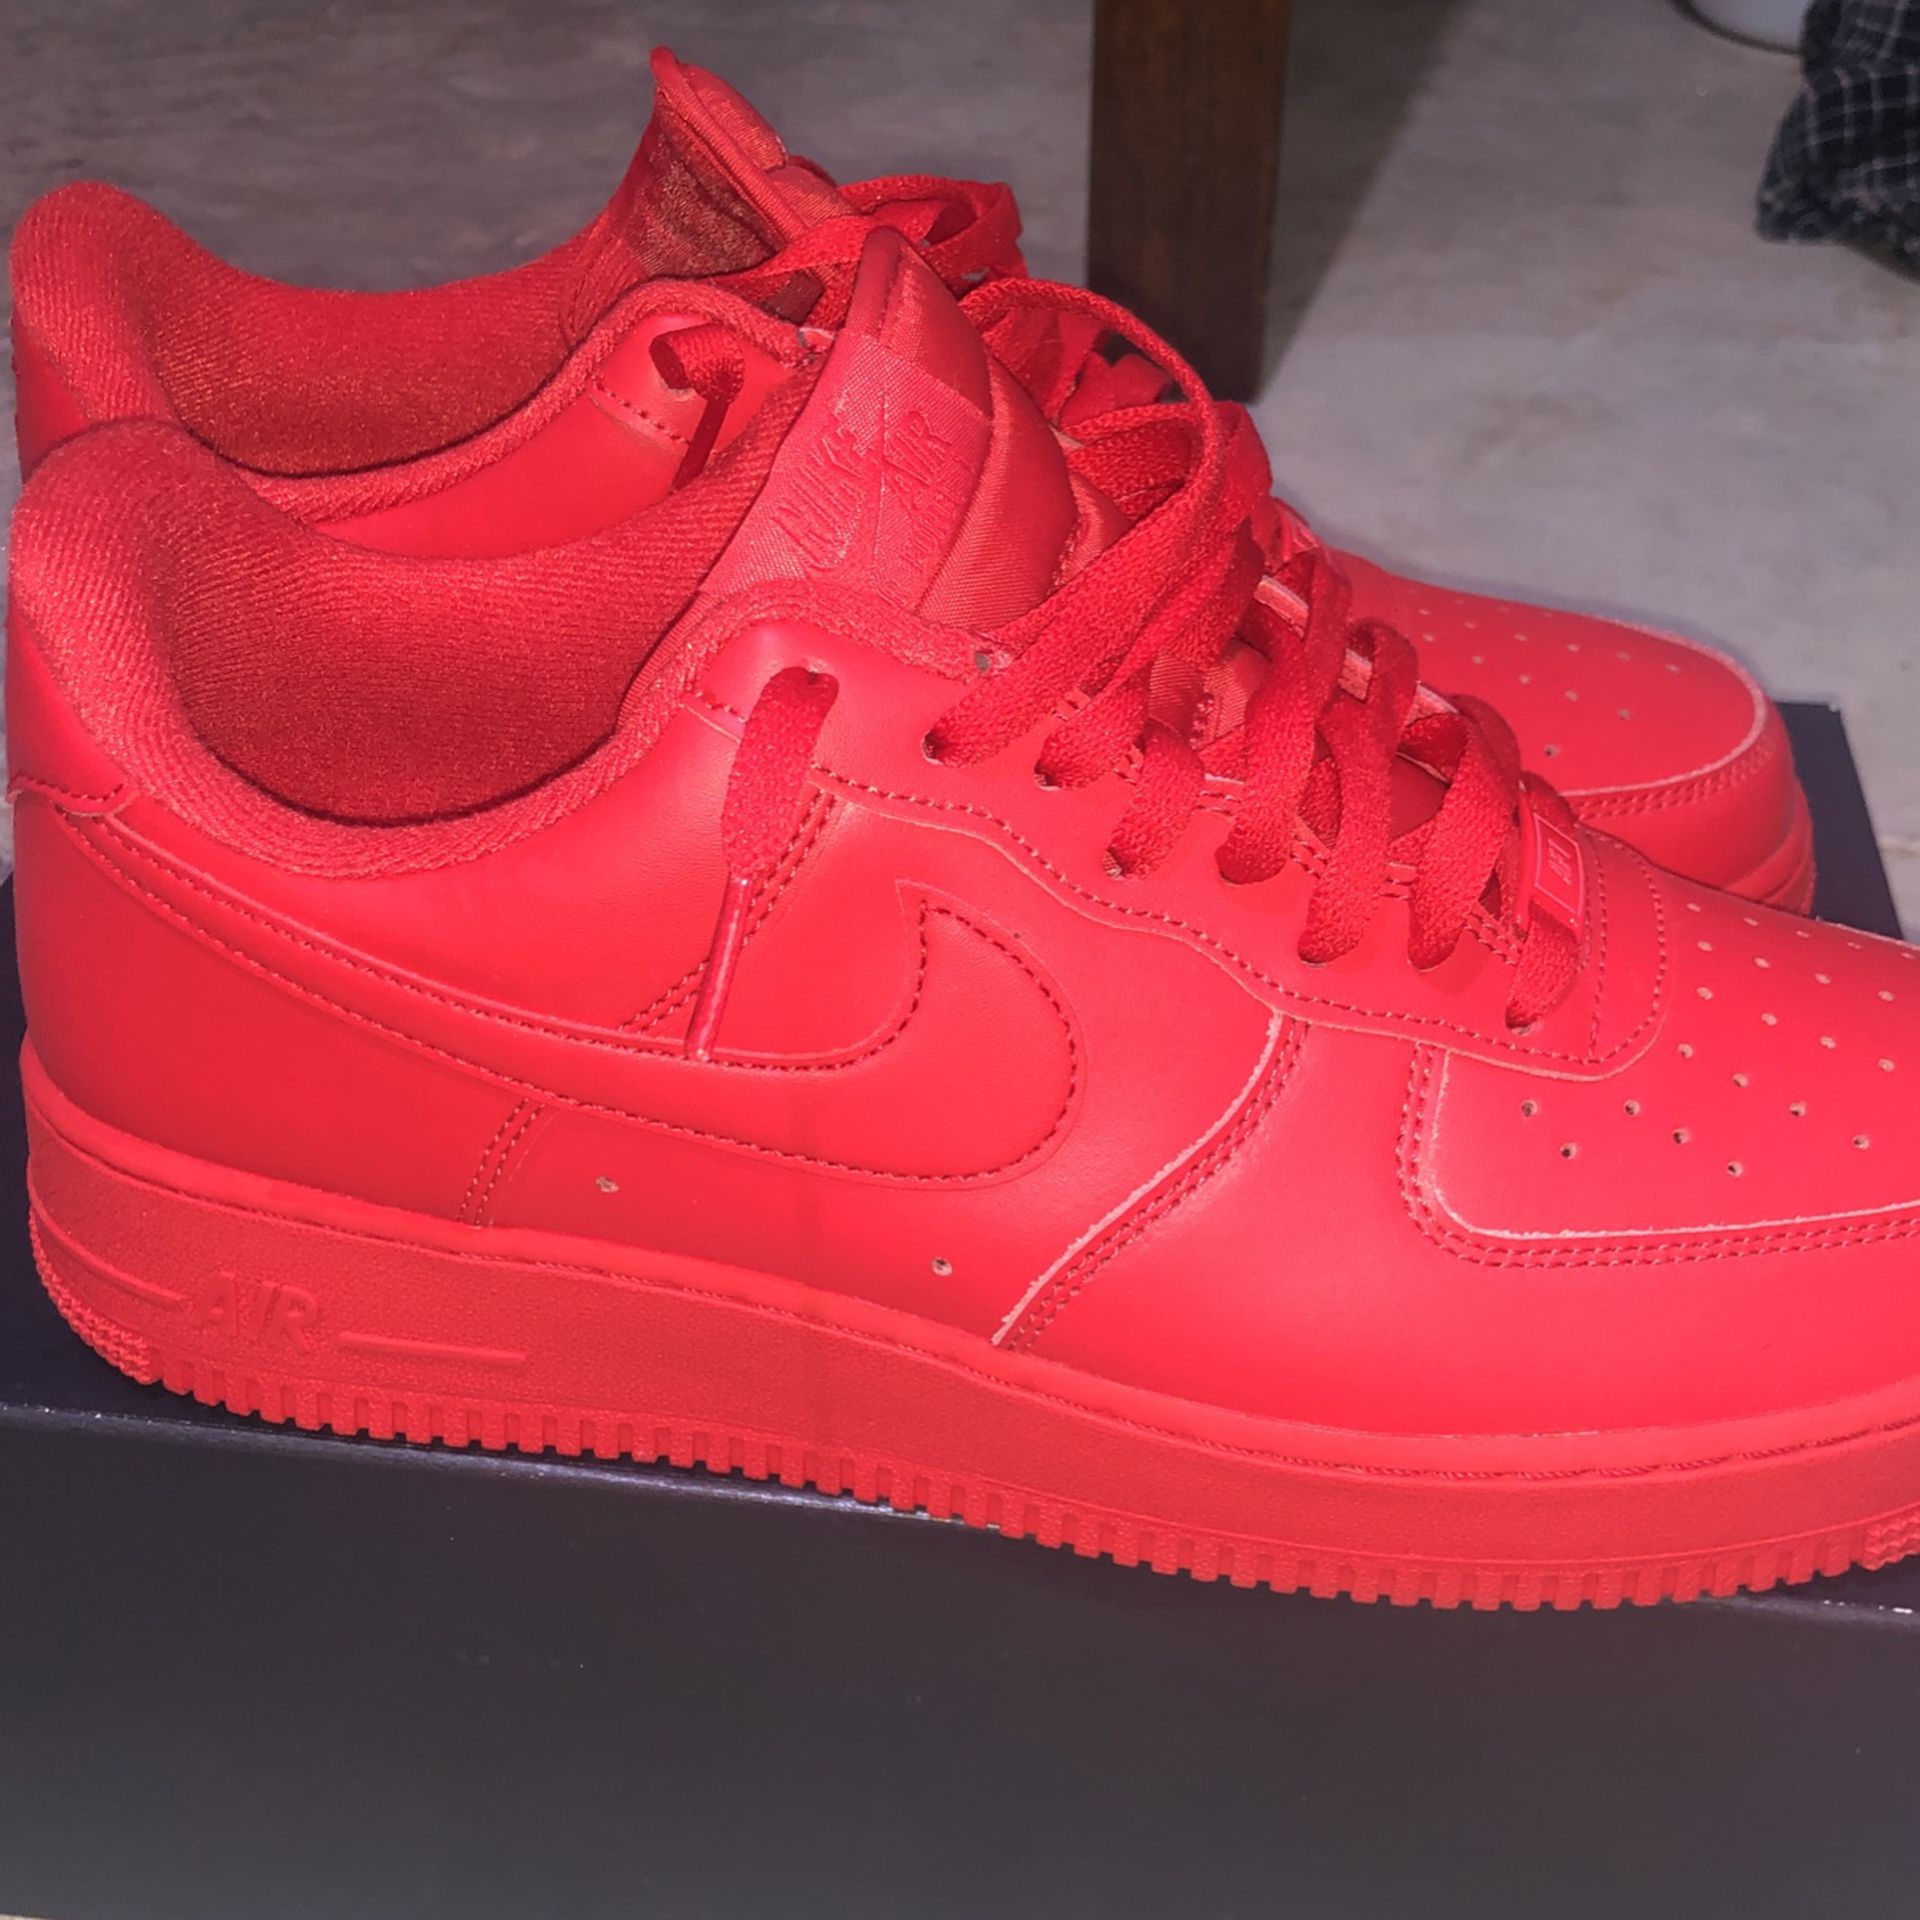 All Red Nike Air Force Ones for Sale in Pekin, IL - OfferUp